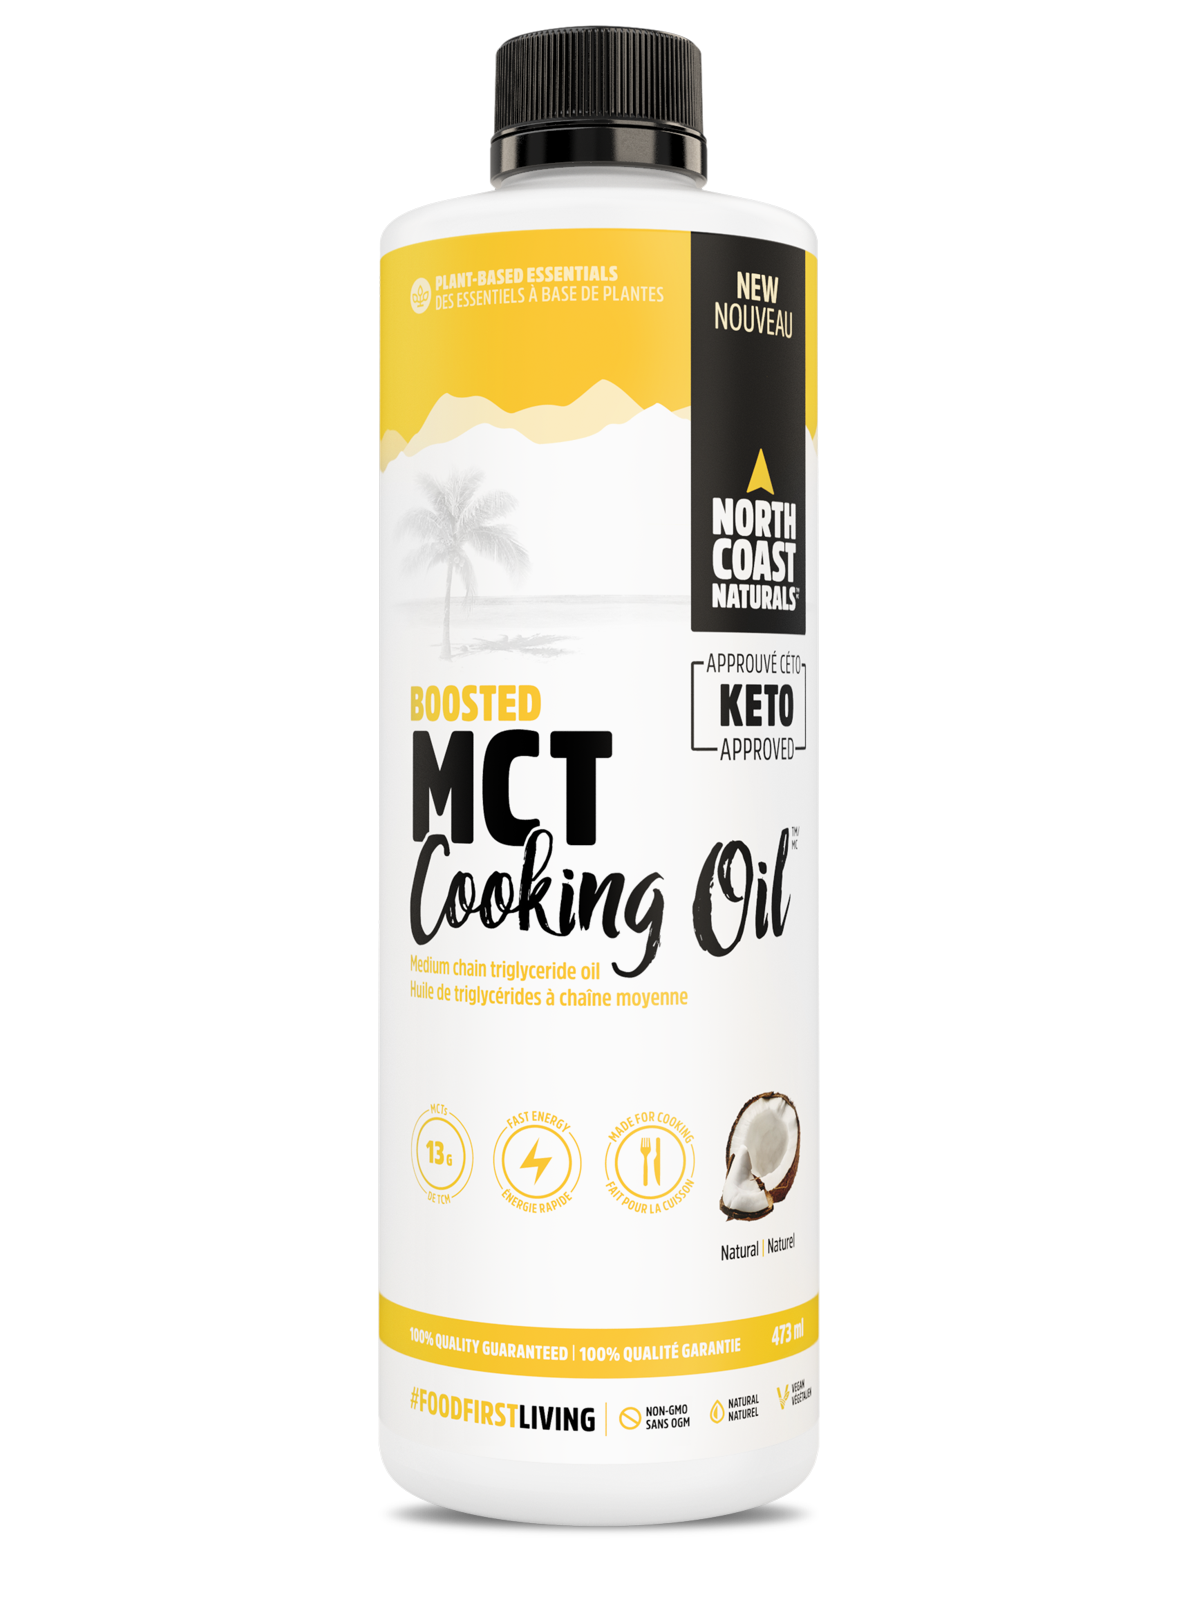 Boosted MCT Cooking Oil - 473 ml